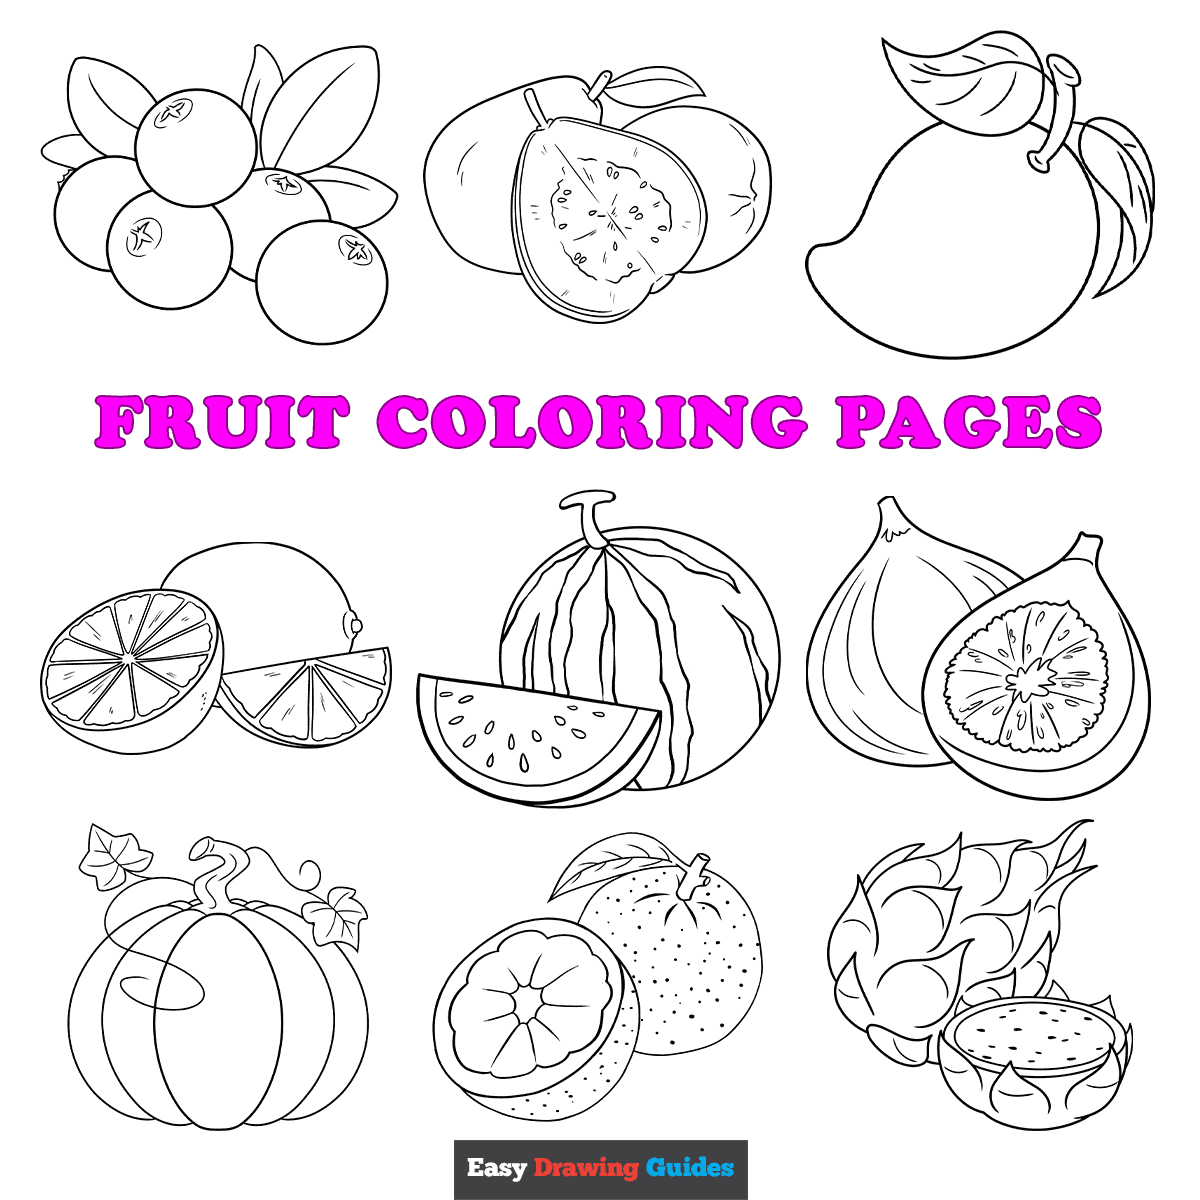 Free printable fruit coloring pages for kids